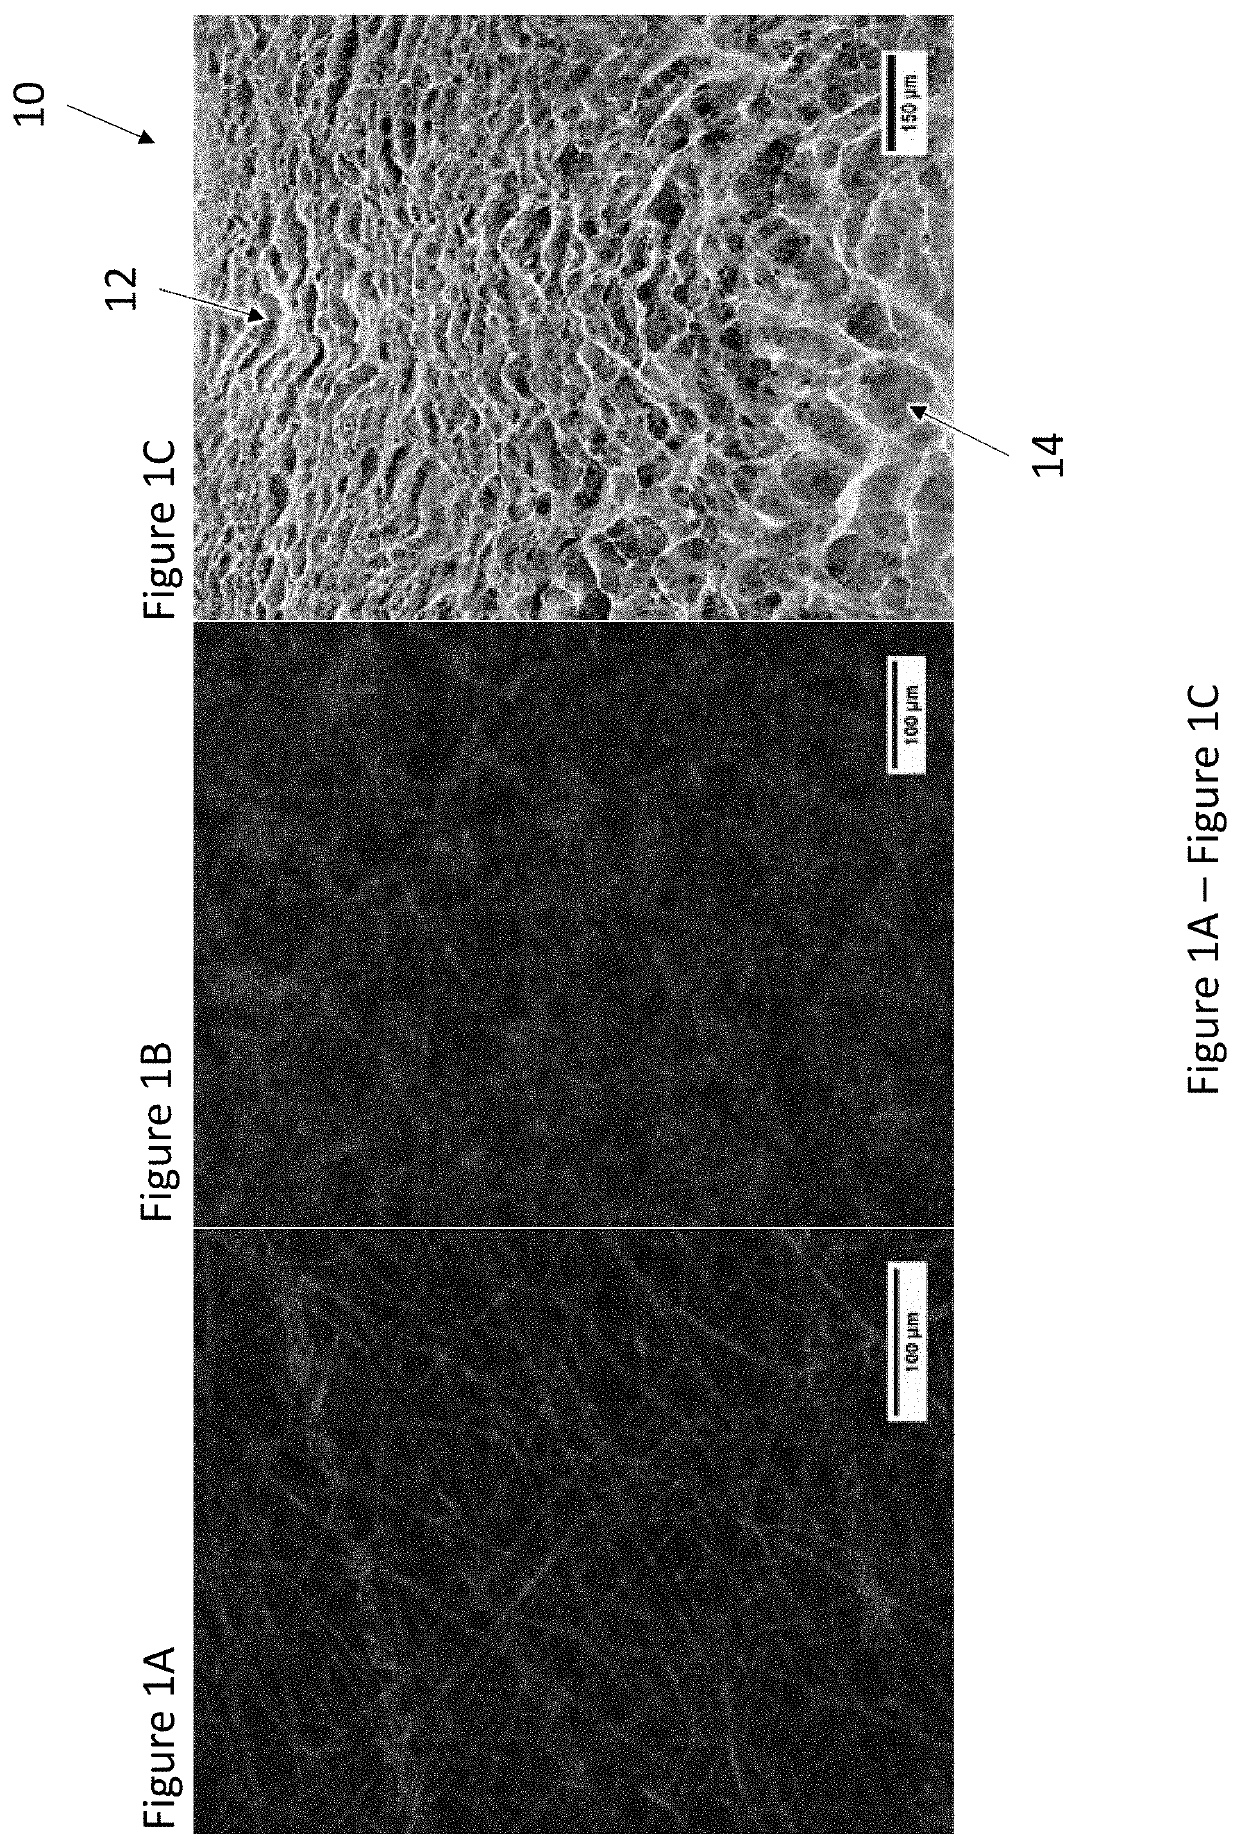 Graded Porous Scaffolds as Immunomodulatory Wound Patches